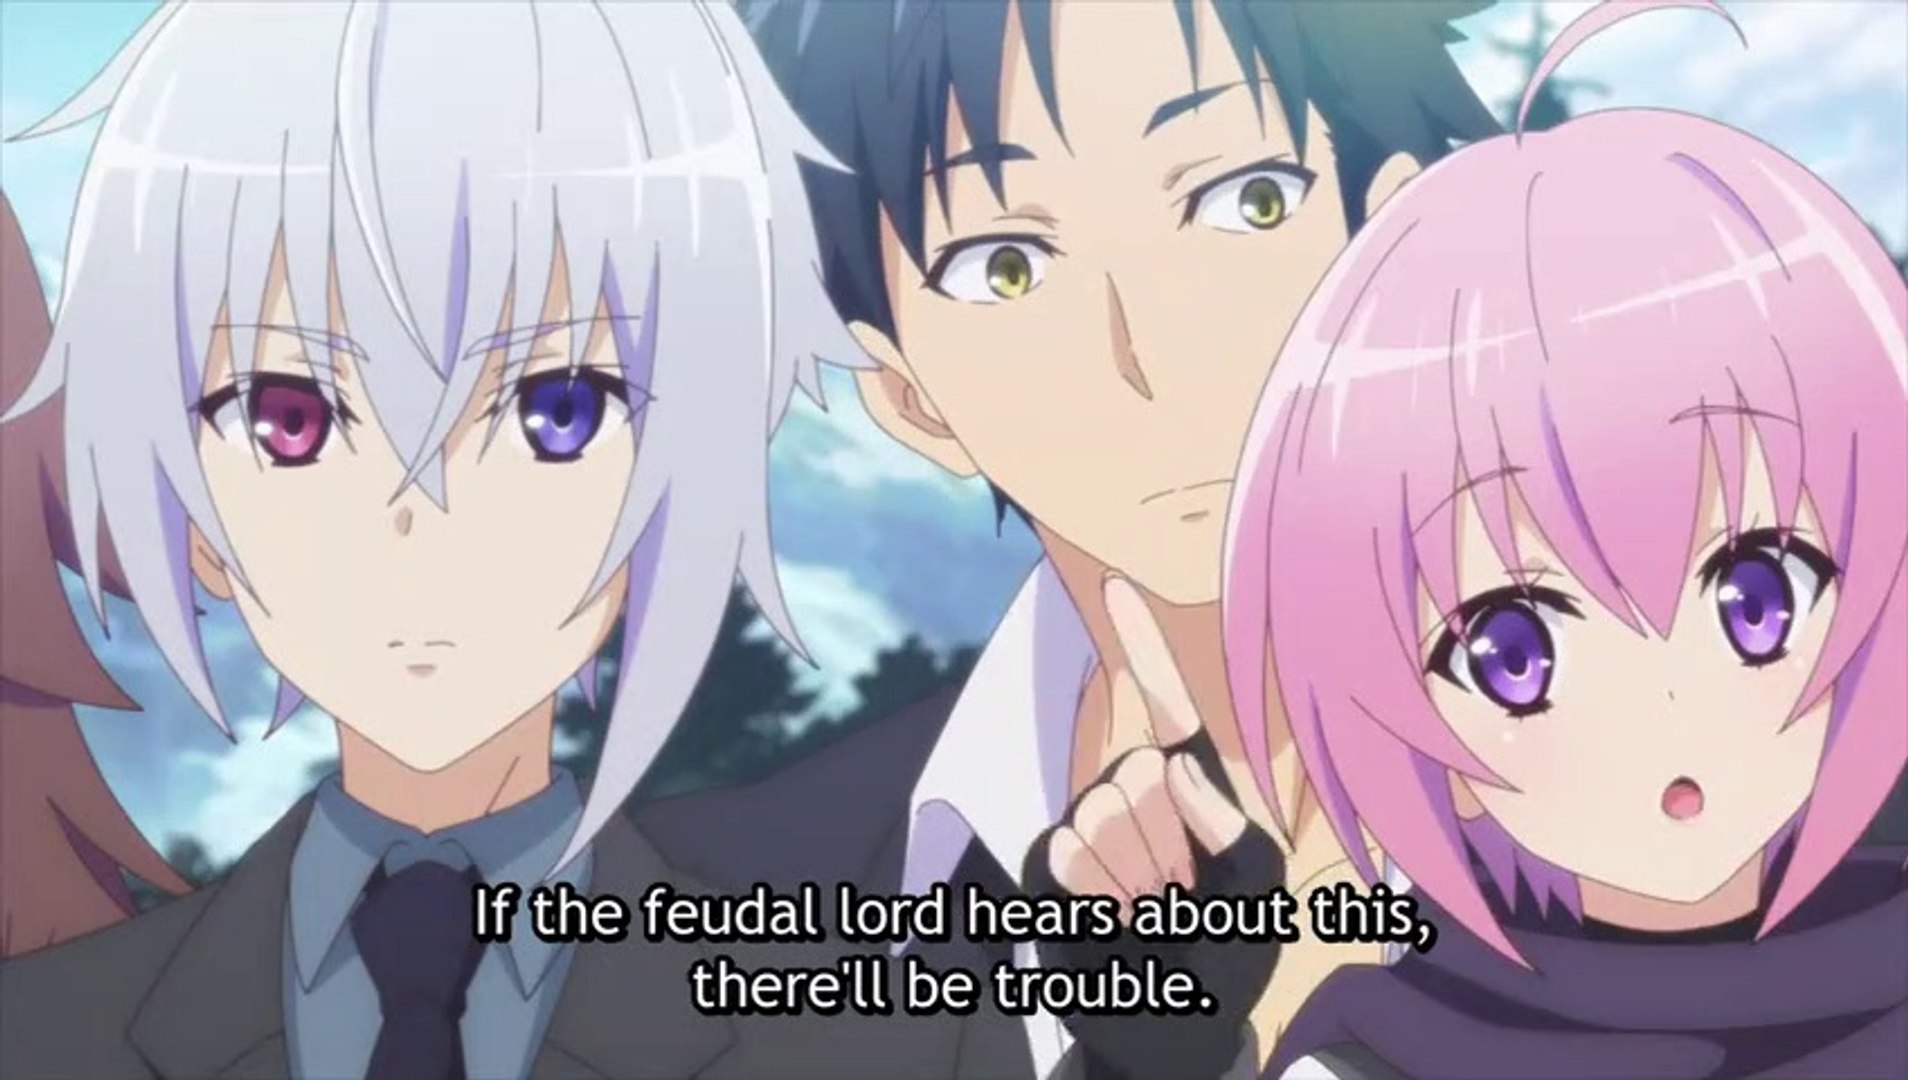 Watch High School Prodigies Have It Easy Even in Another World